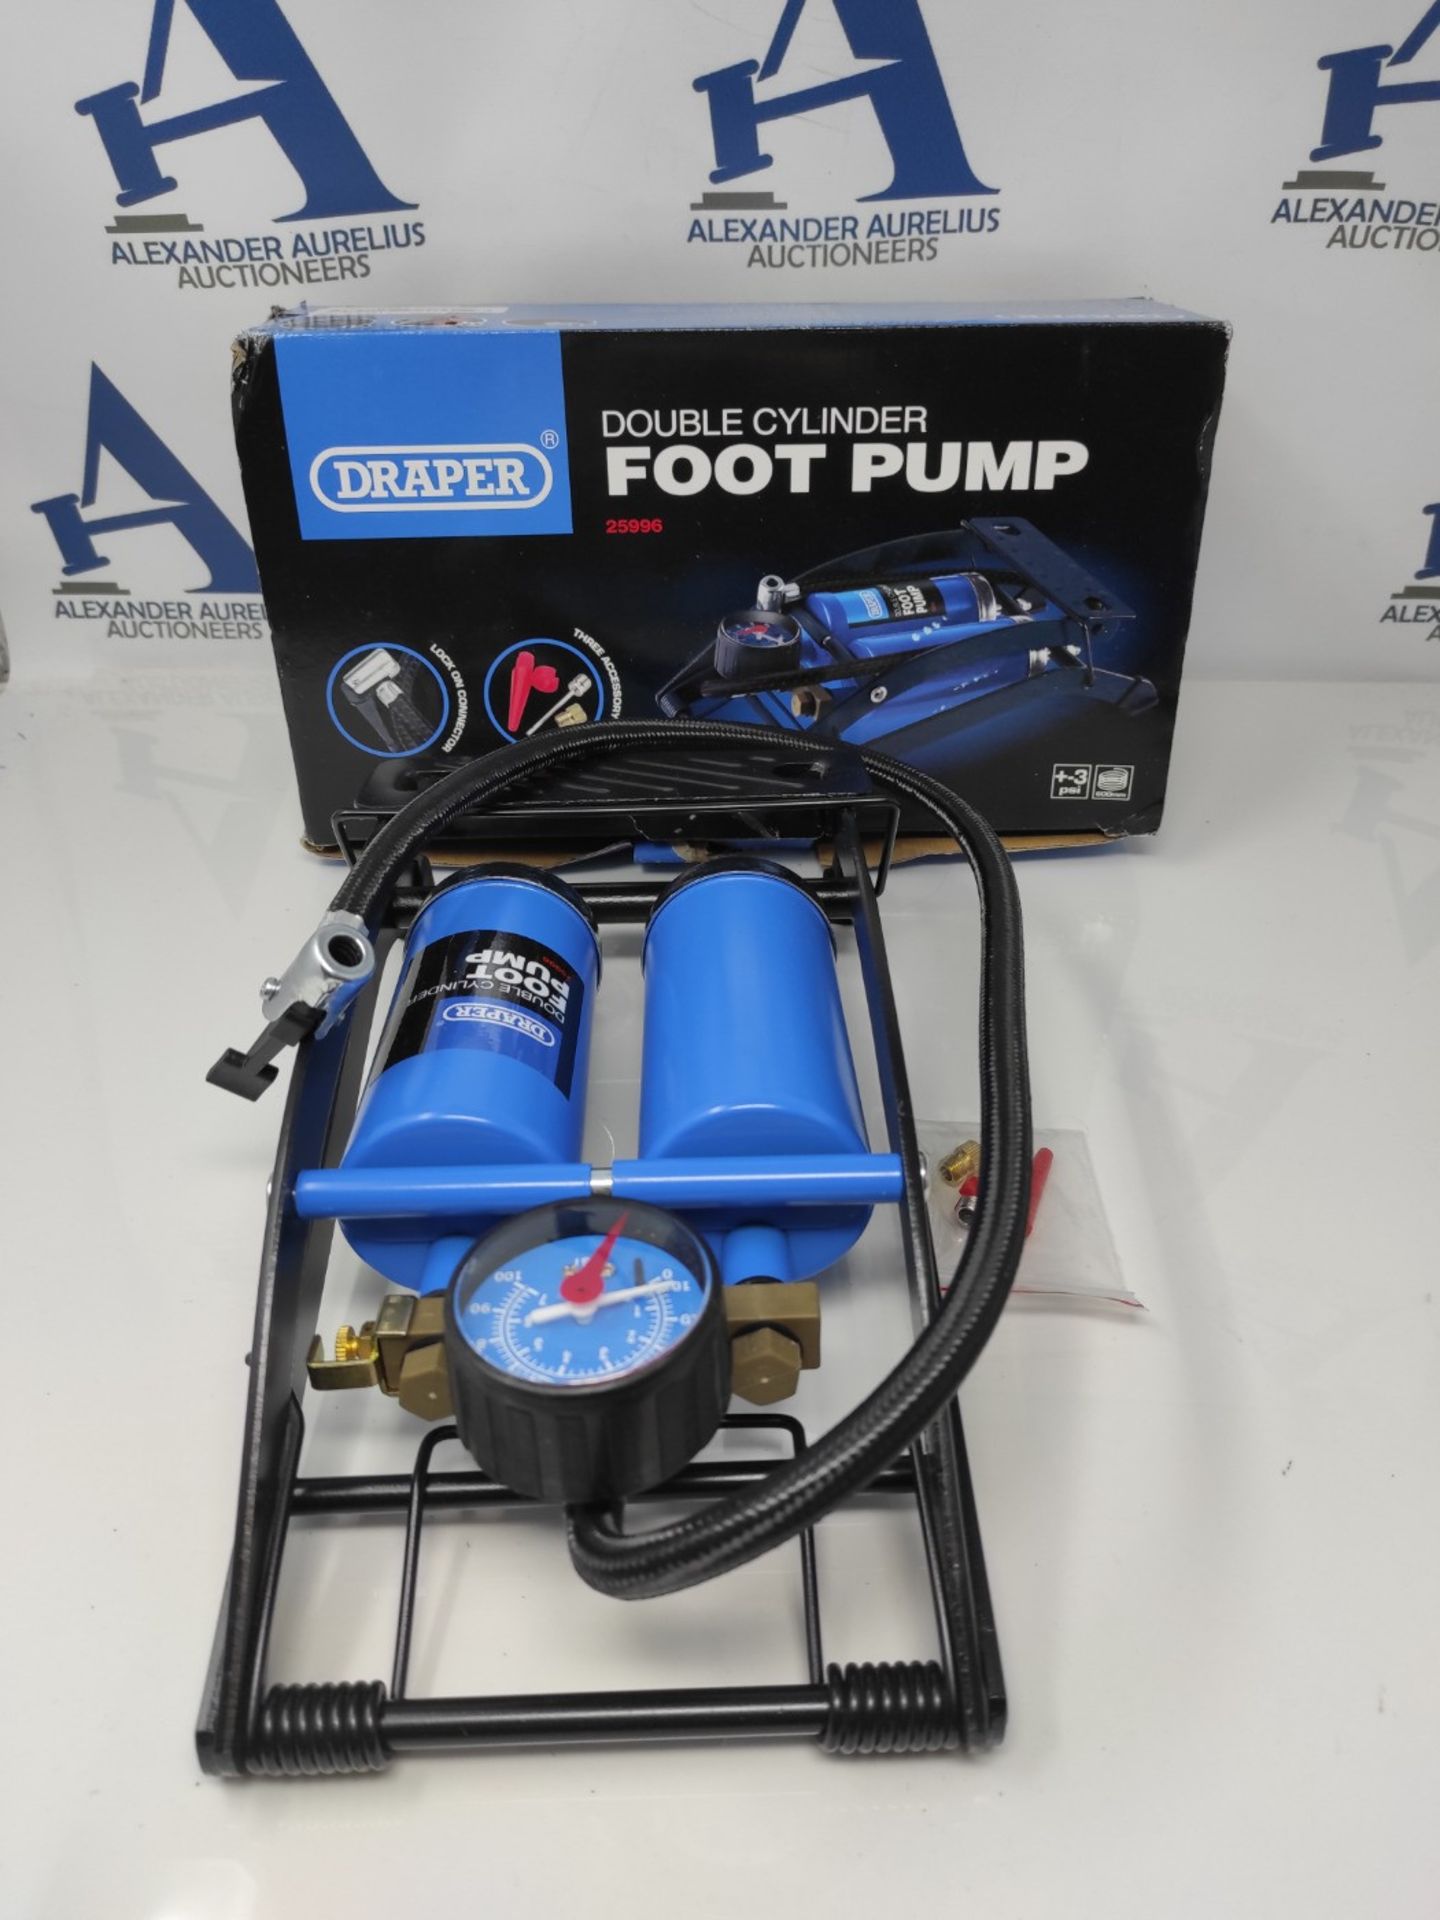 Draper Double-Cylinder Foot Pump with Pressure Gauge & Accessories - 25996 - Manual In - Image 2 of 2